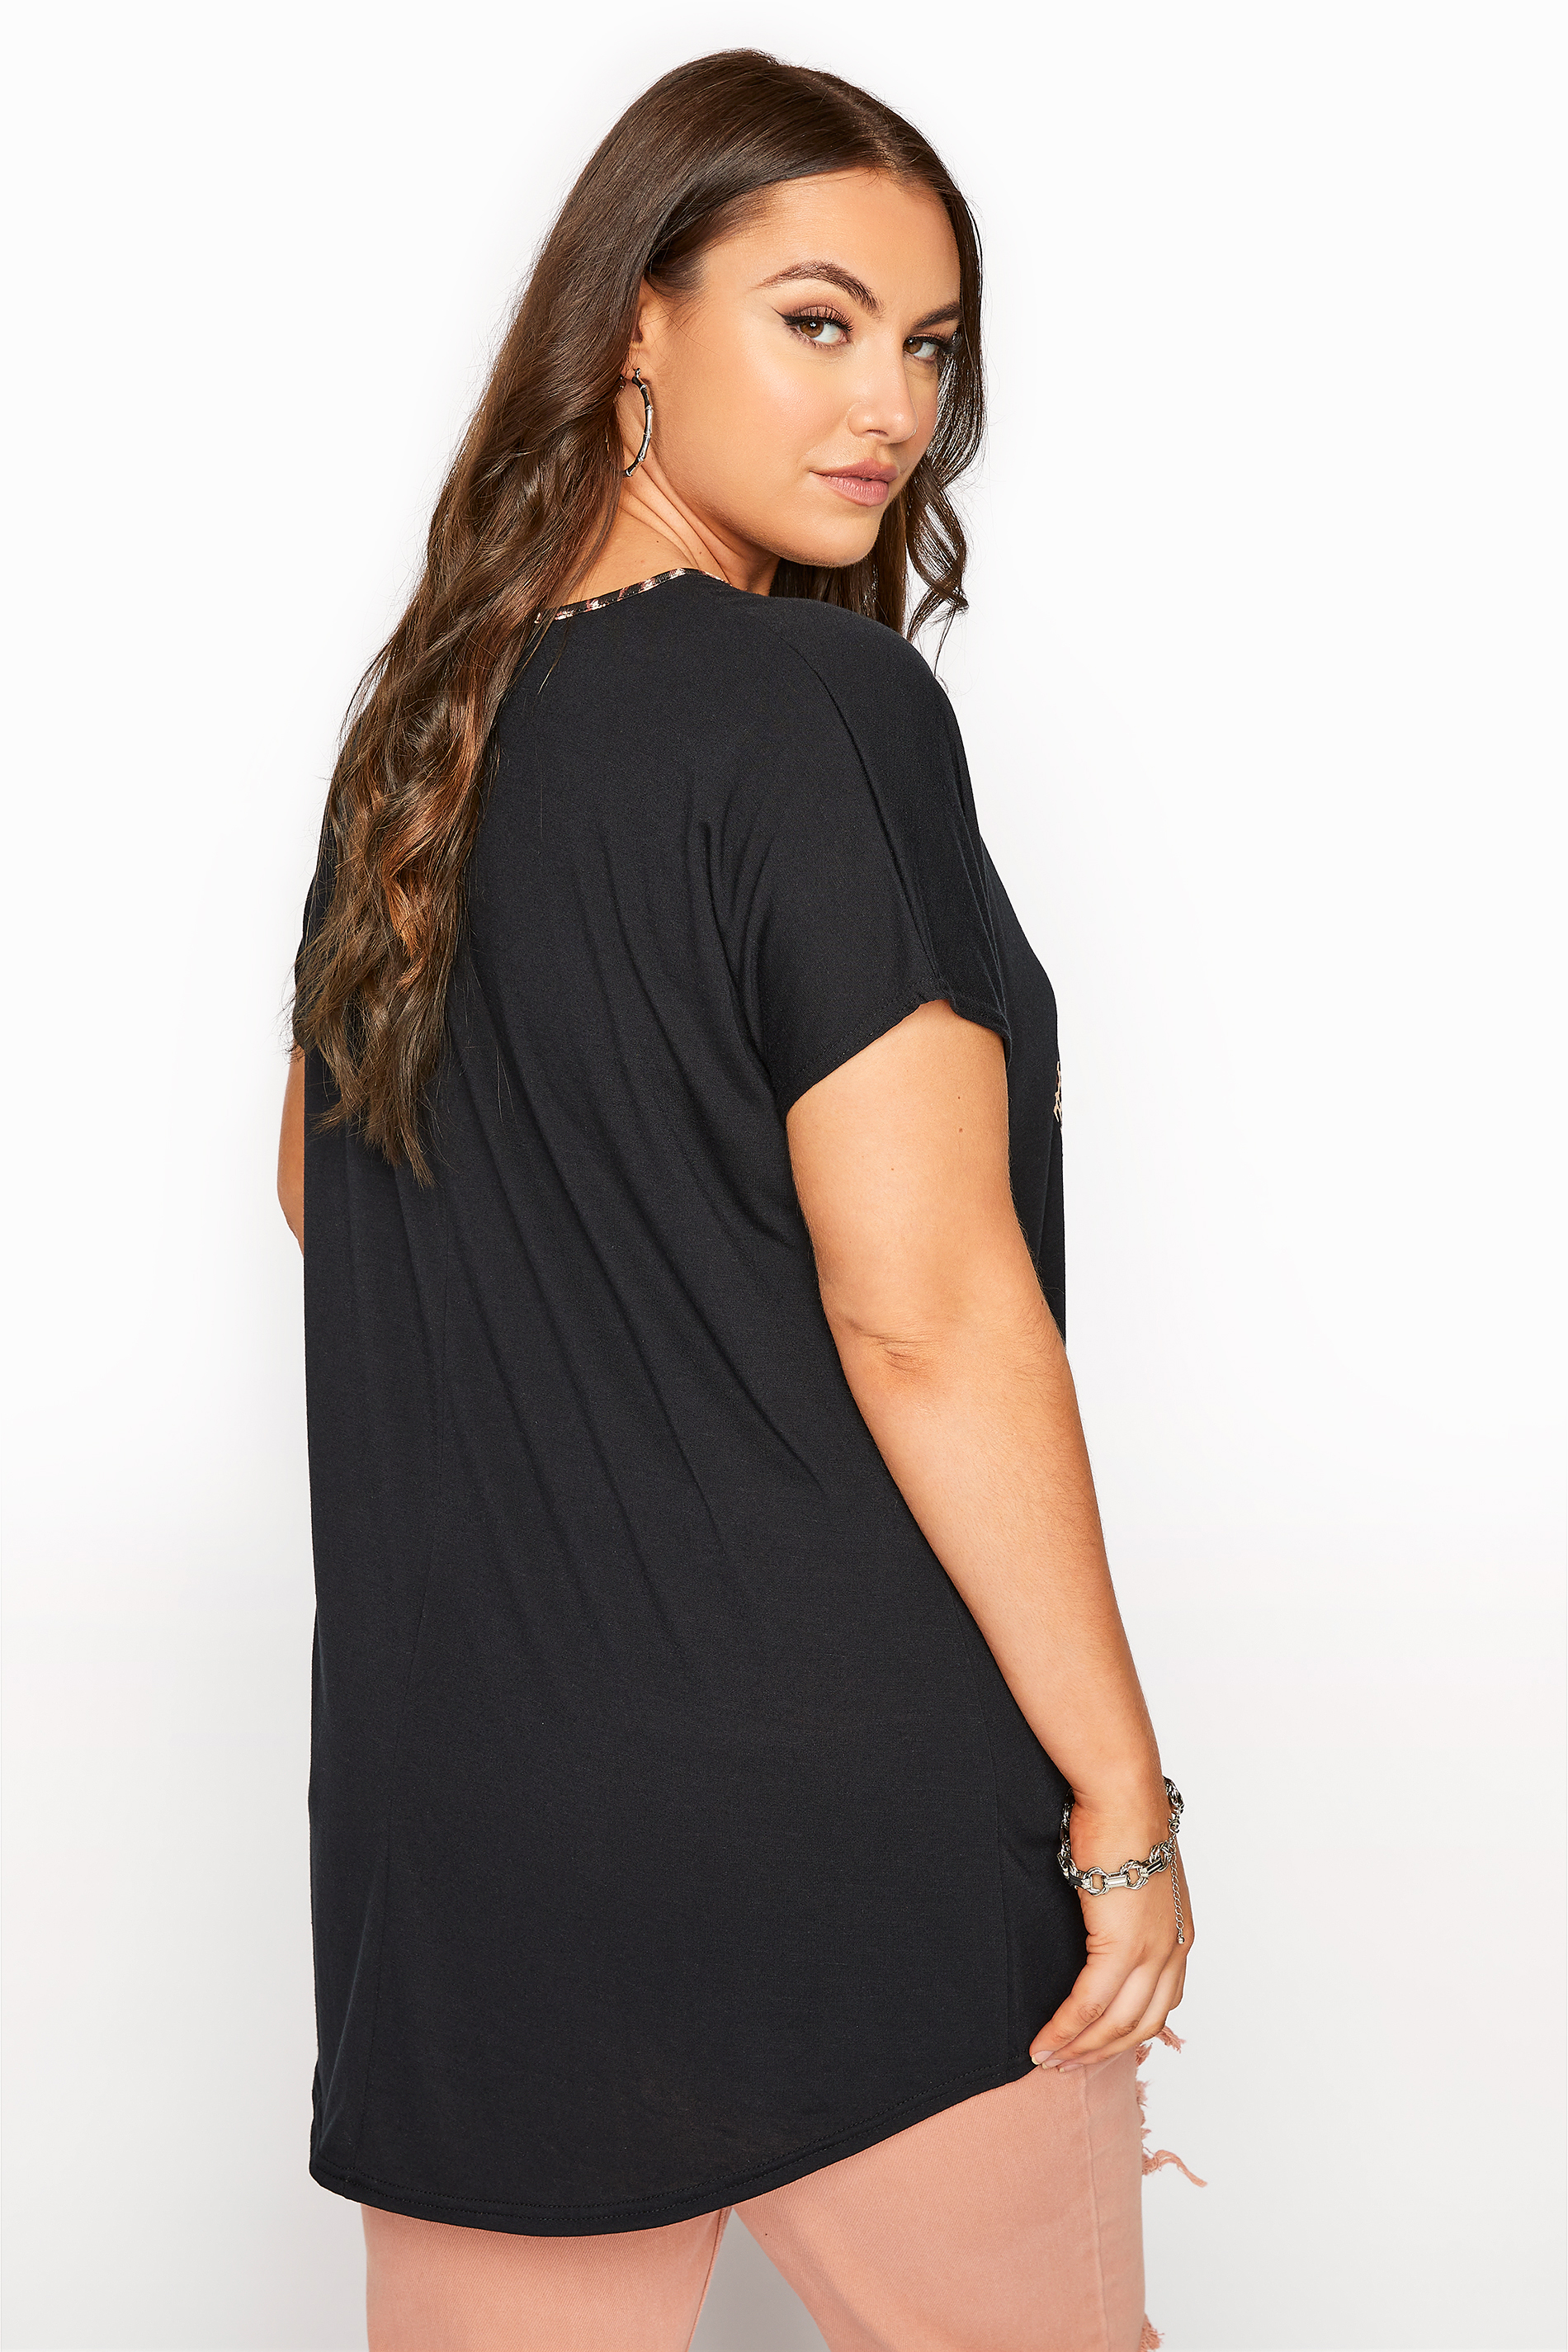 Grande taille  Tops Grande taille  Tops Ourlet Plongeant | T-Shirt Léopard Ourlet Plongeant - WO97972